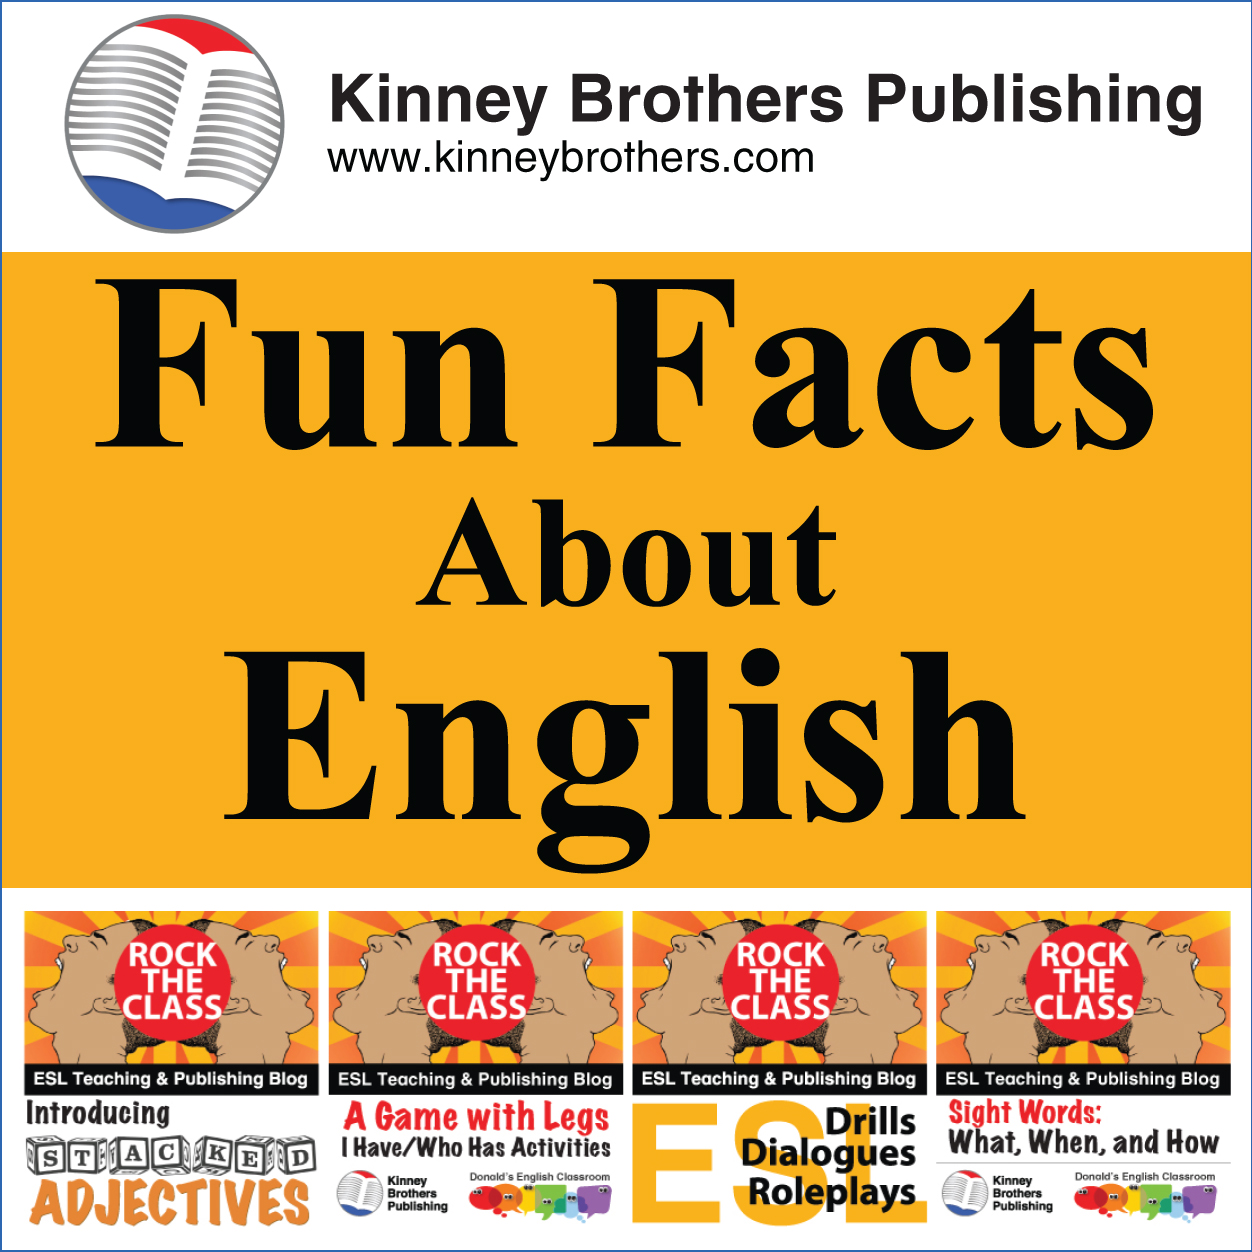 Fun Facts About English